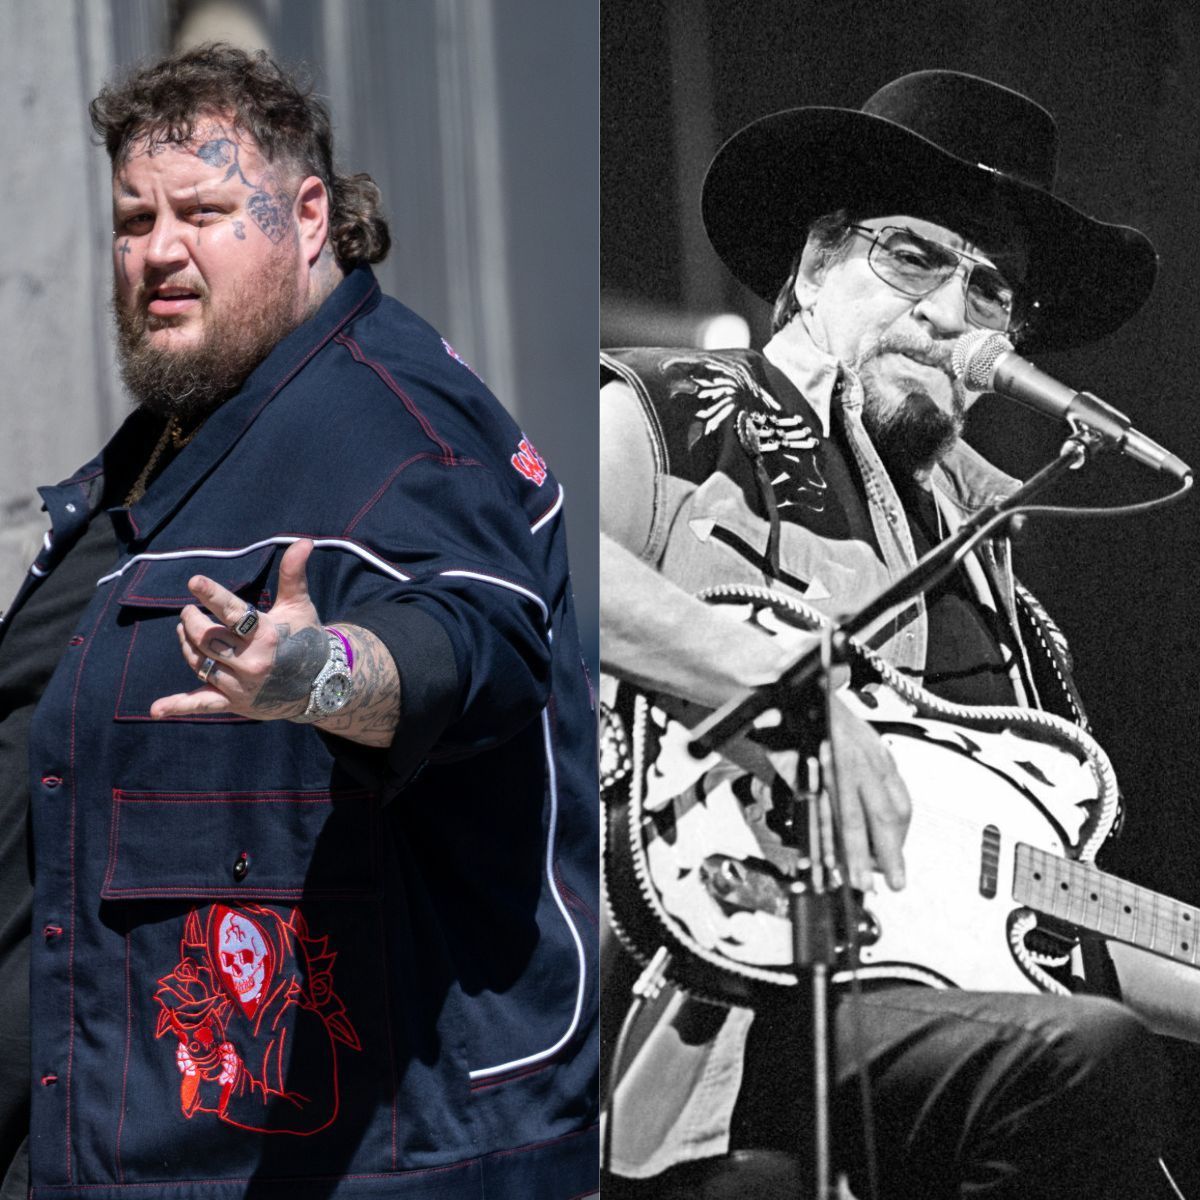 how is jelly roll related to waylon jennings